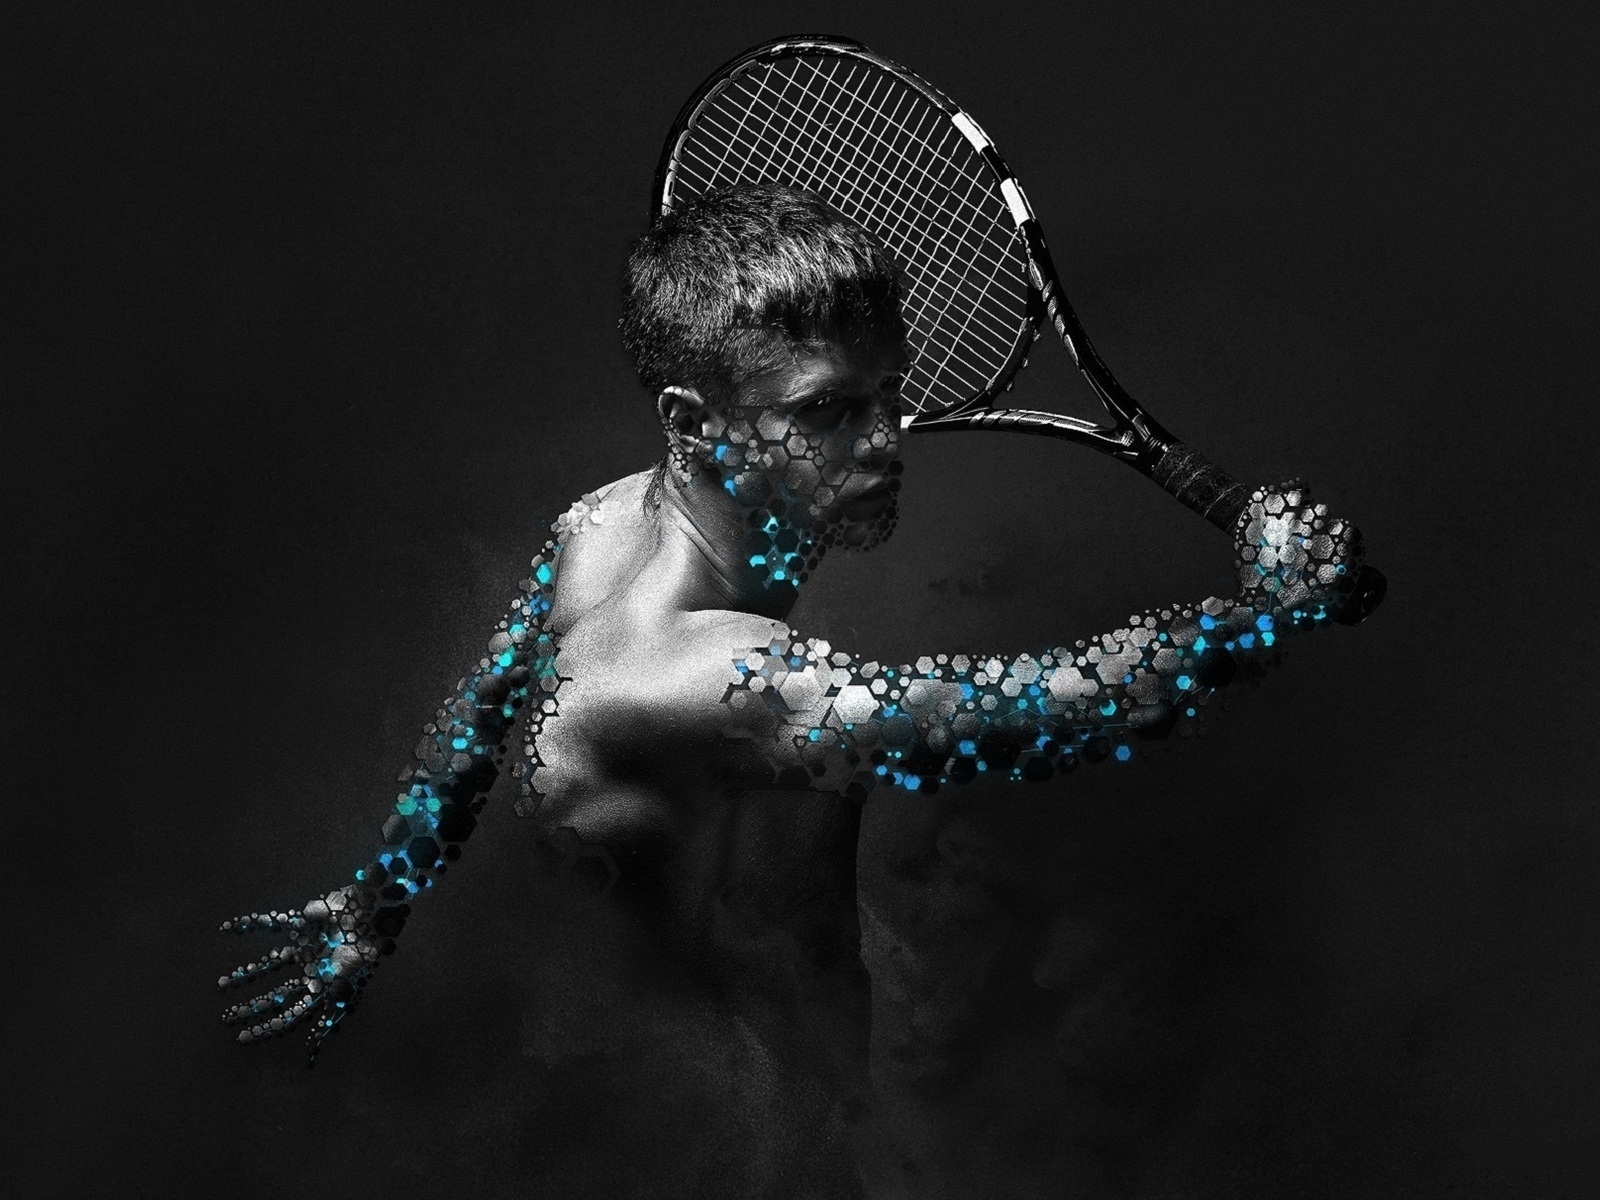 Tenis Player for 1600 x 1200 resolution